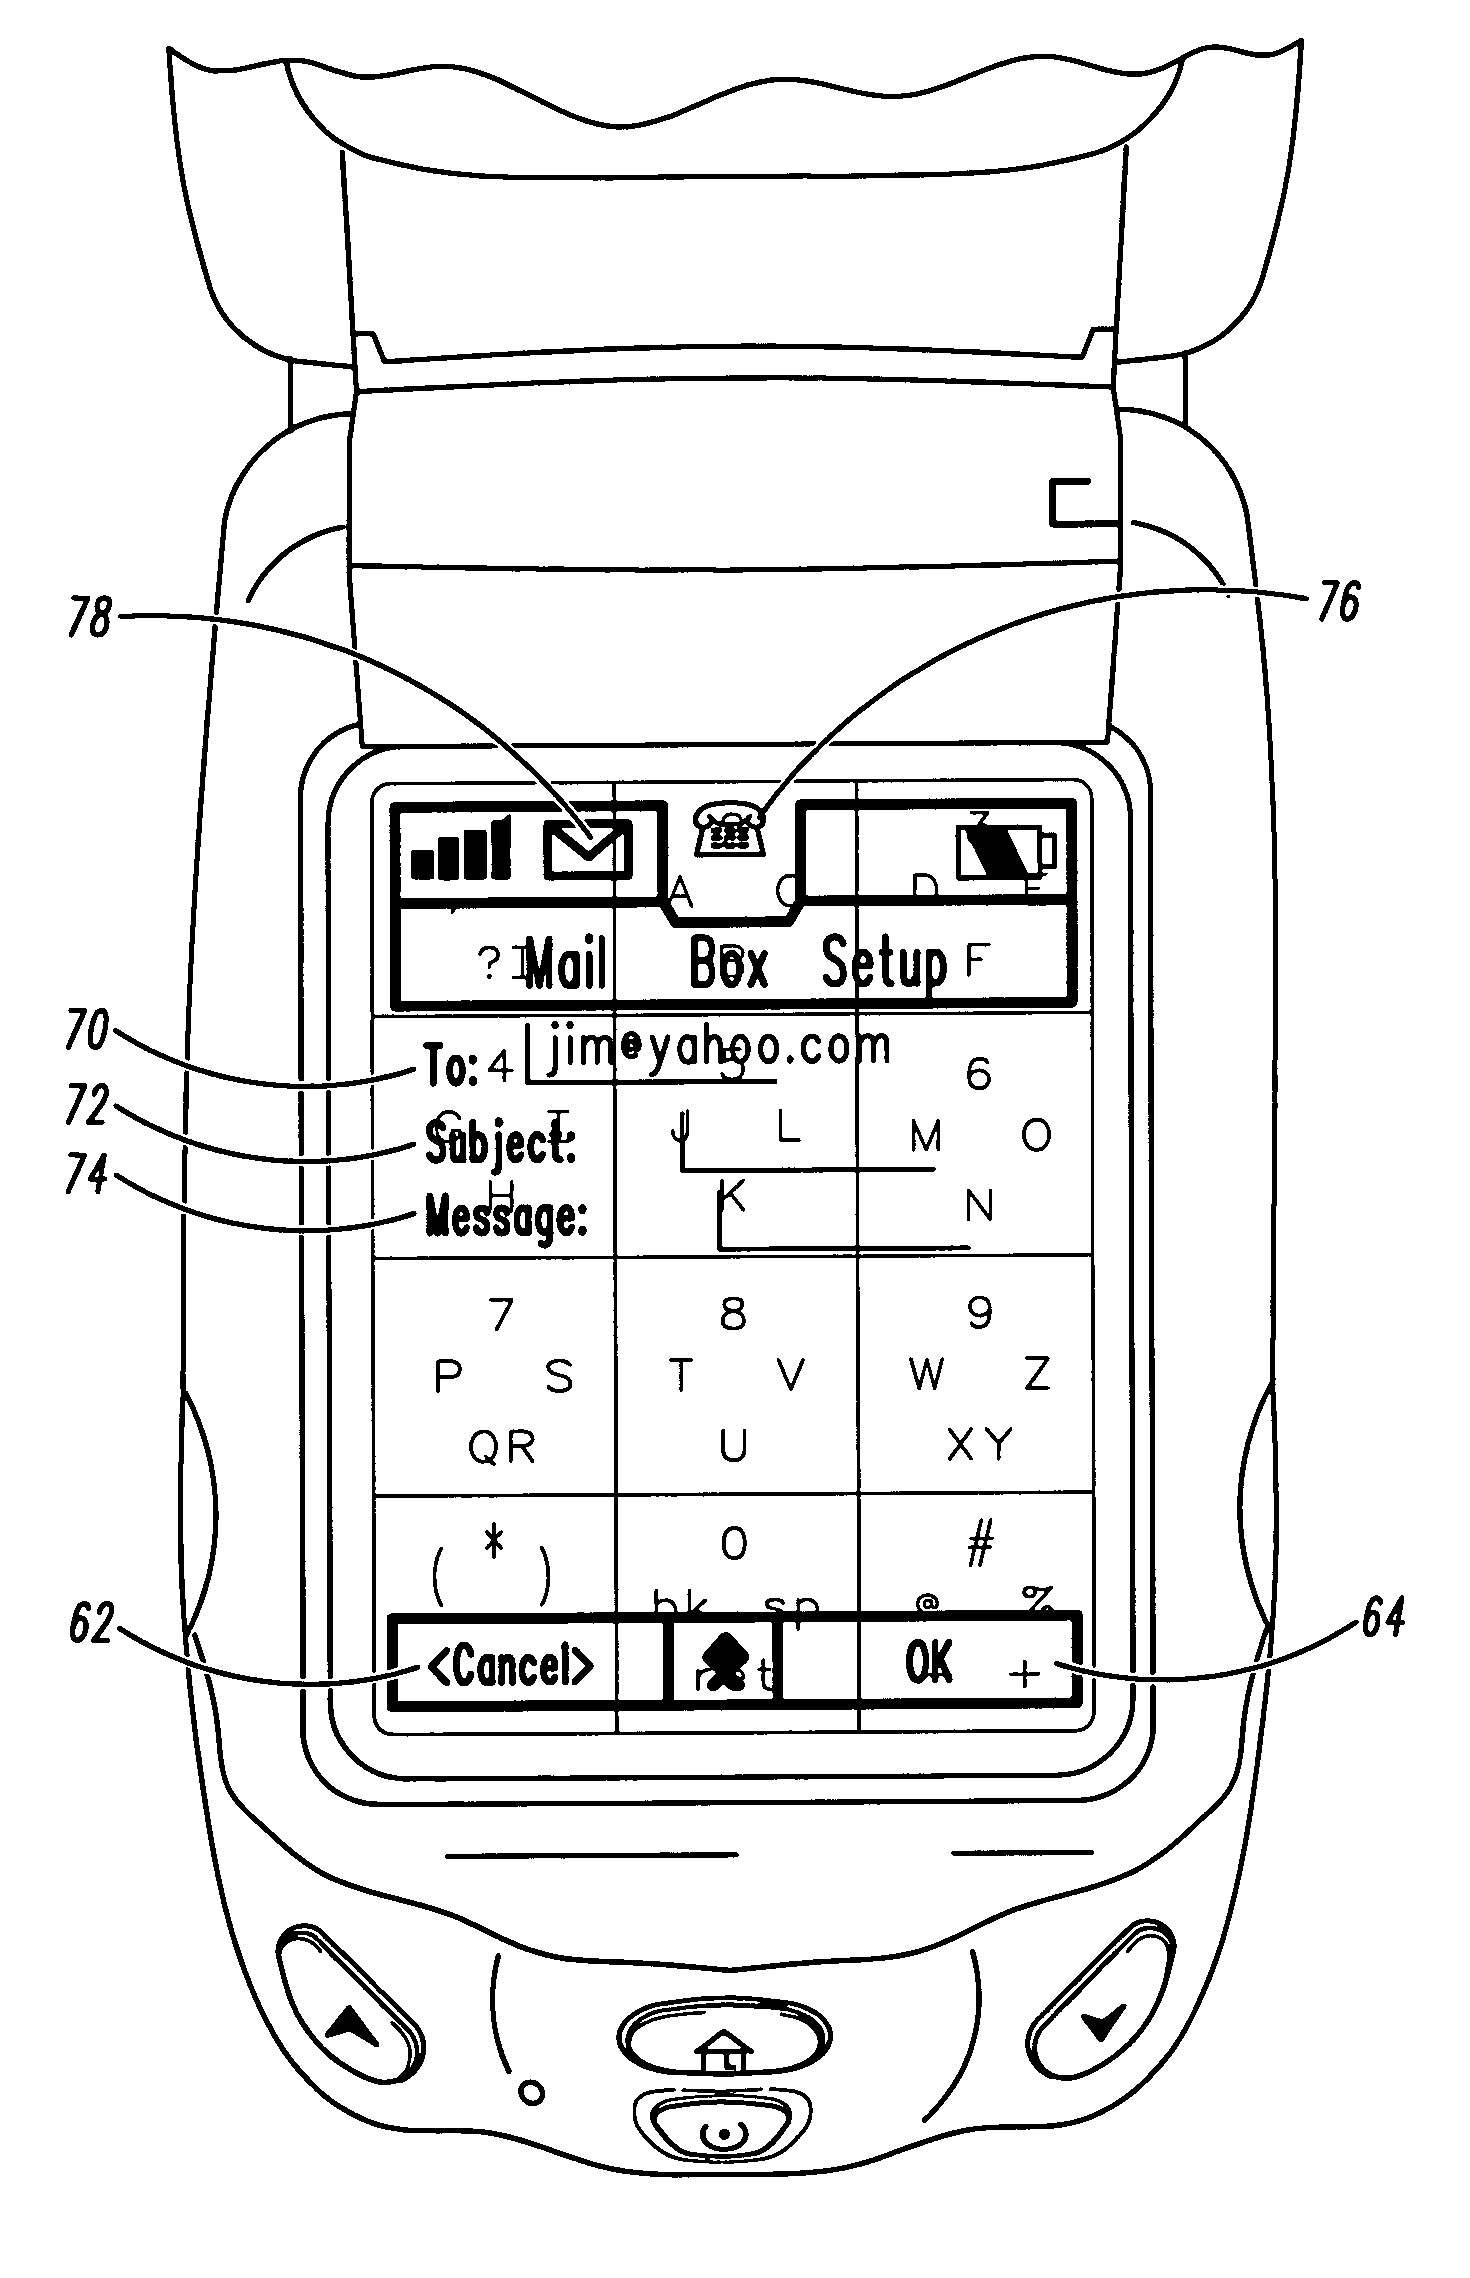 Application-independent text entry for touch-sensitive display